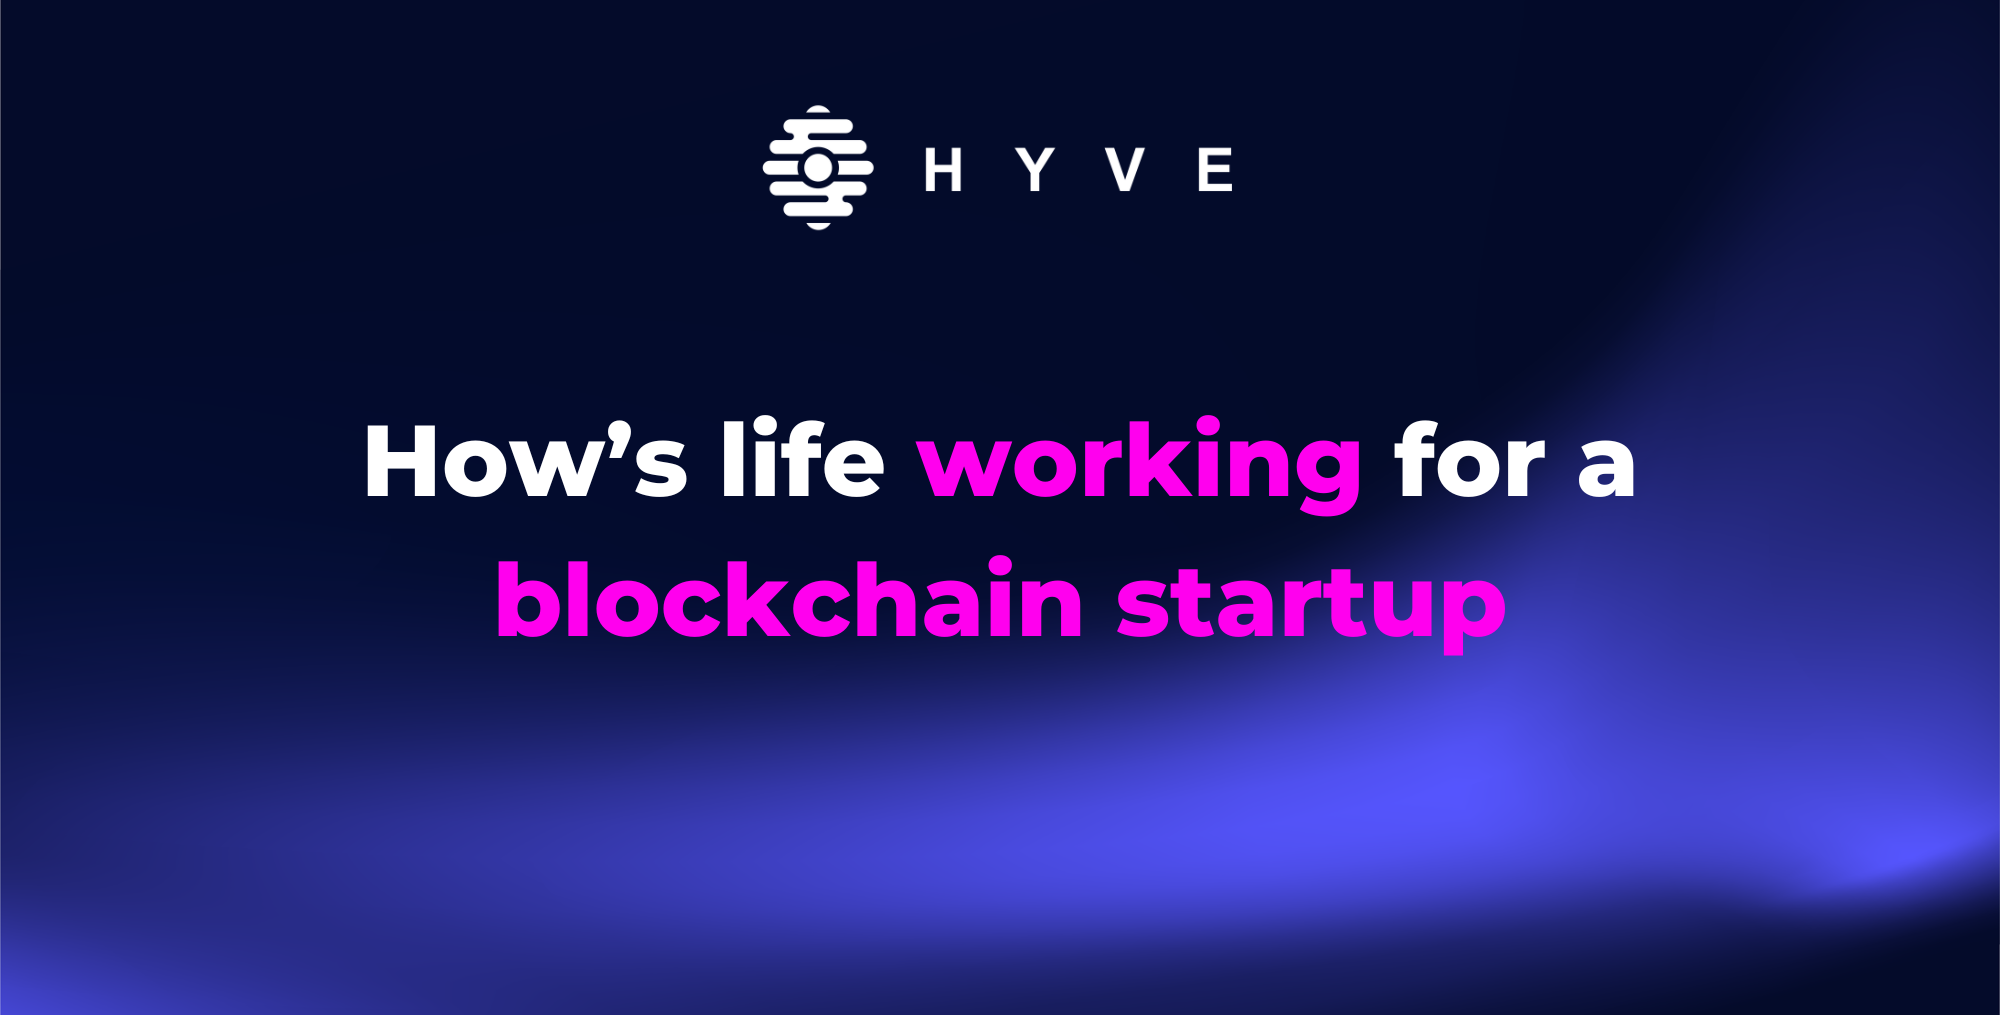 How’s life working for a blockchain startup